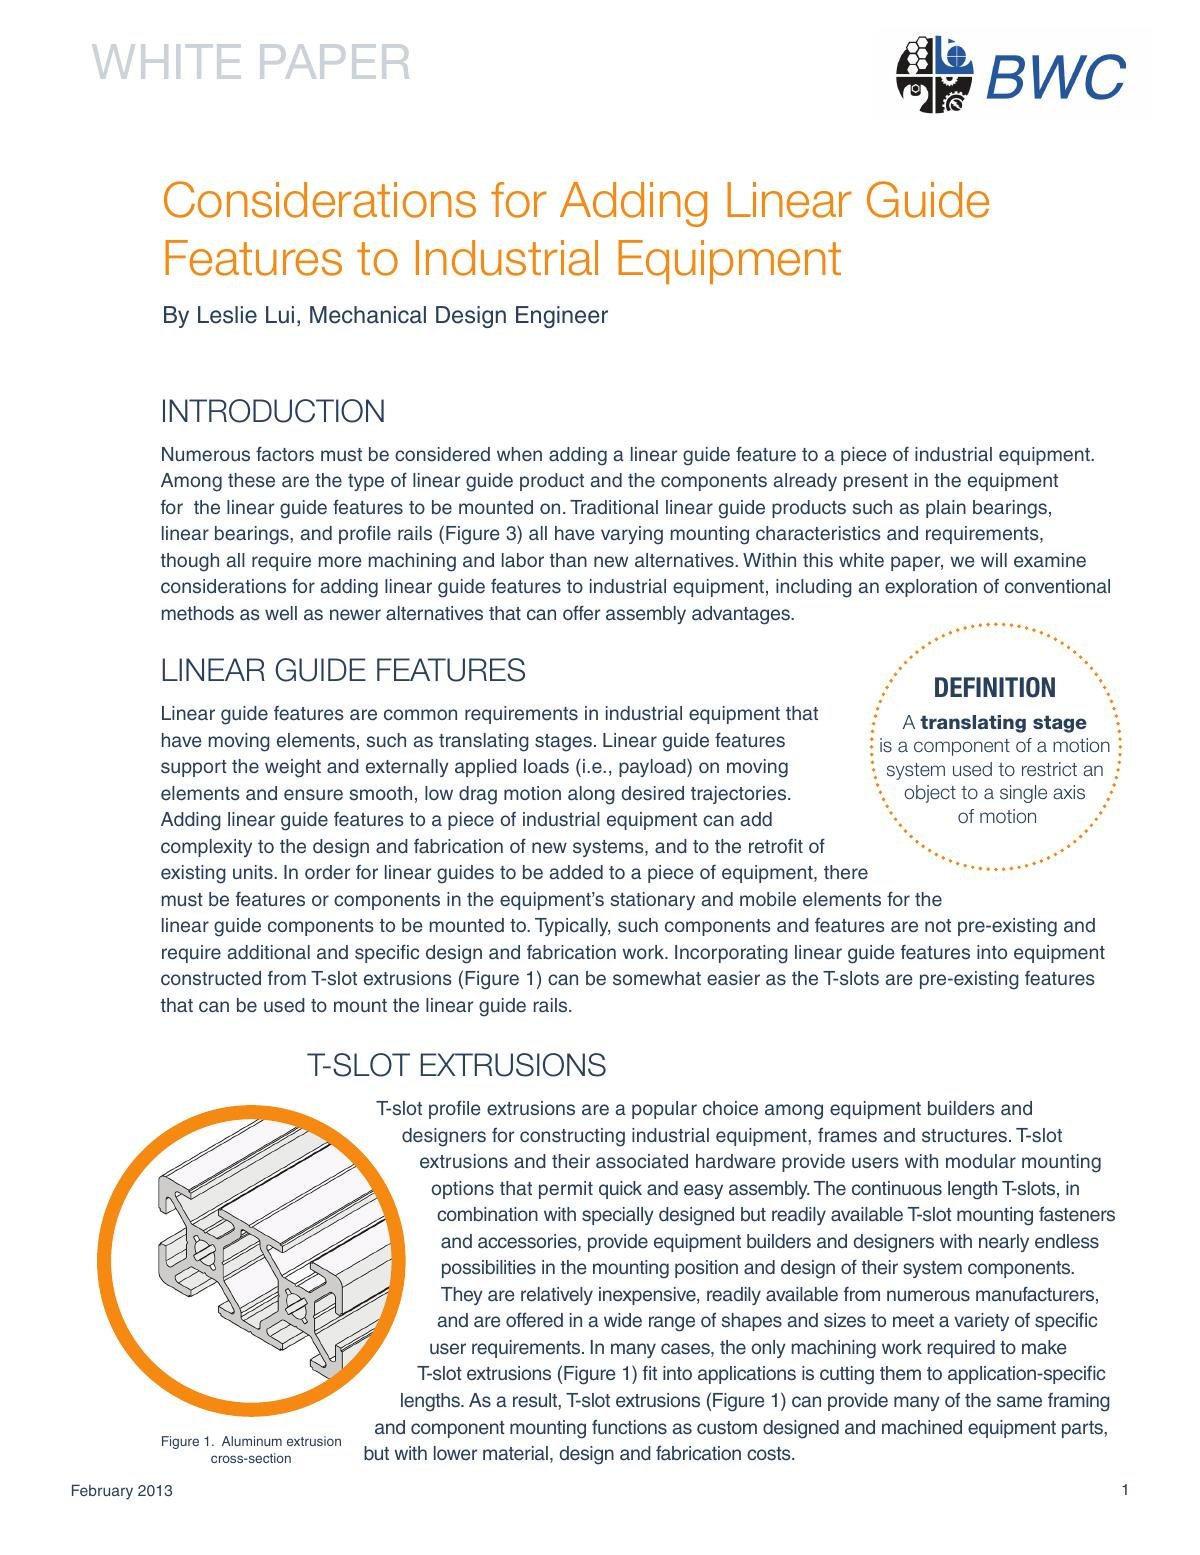 Considerations for Adding Linear Guide Features to Industrial Equipment